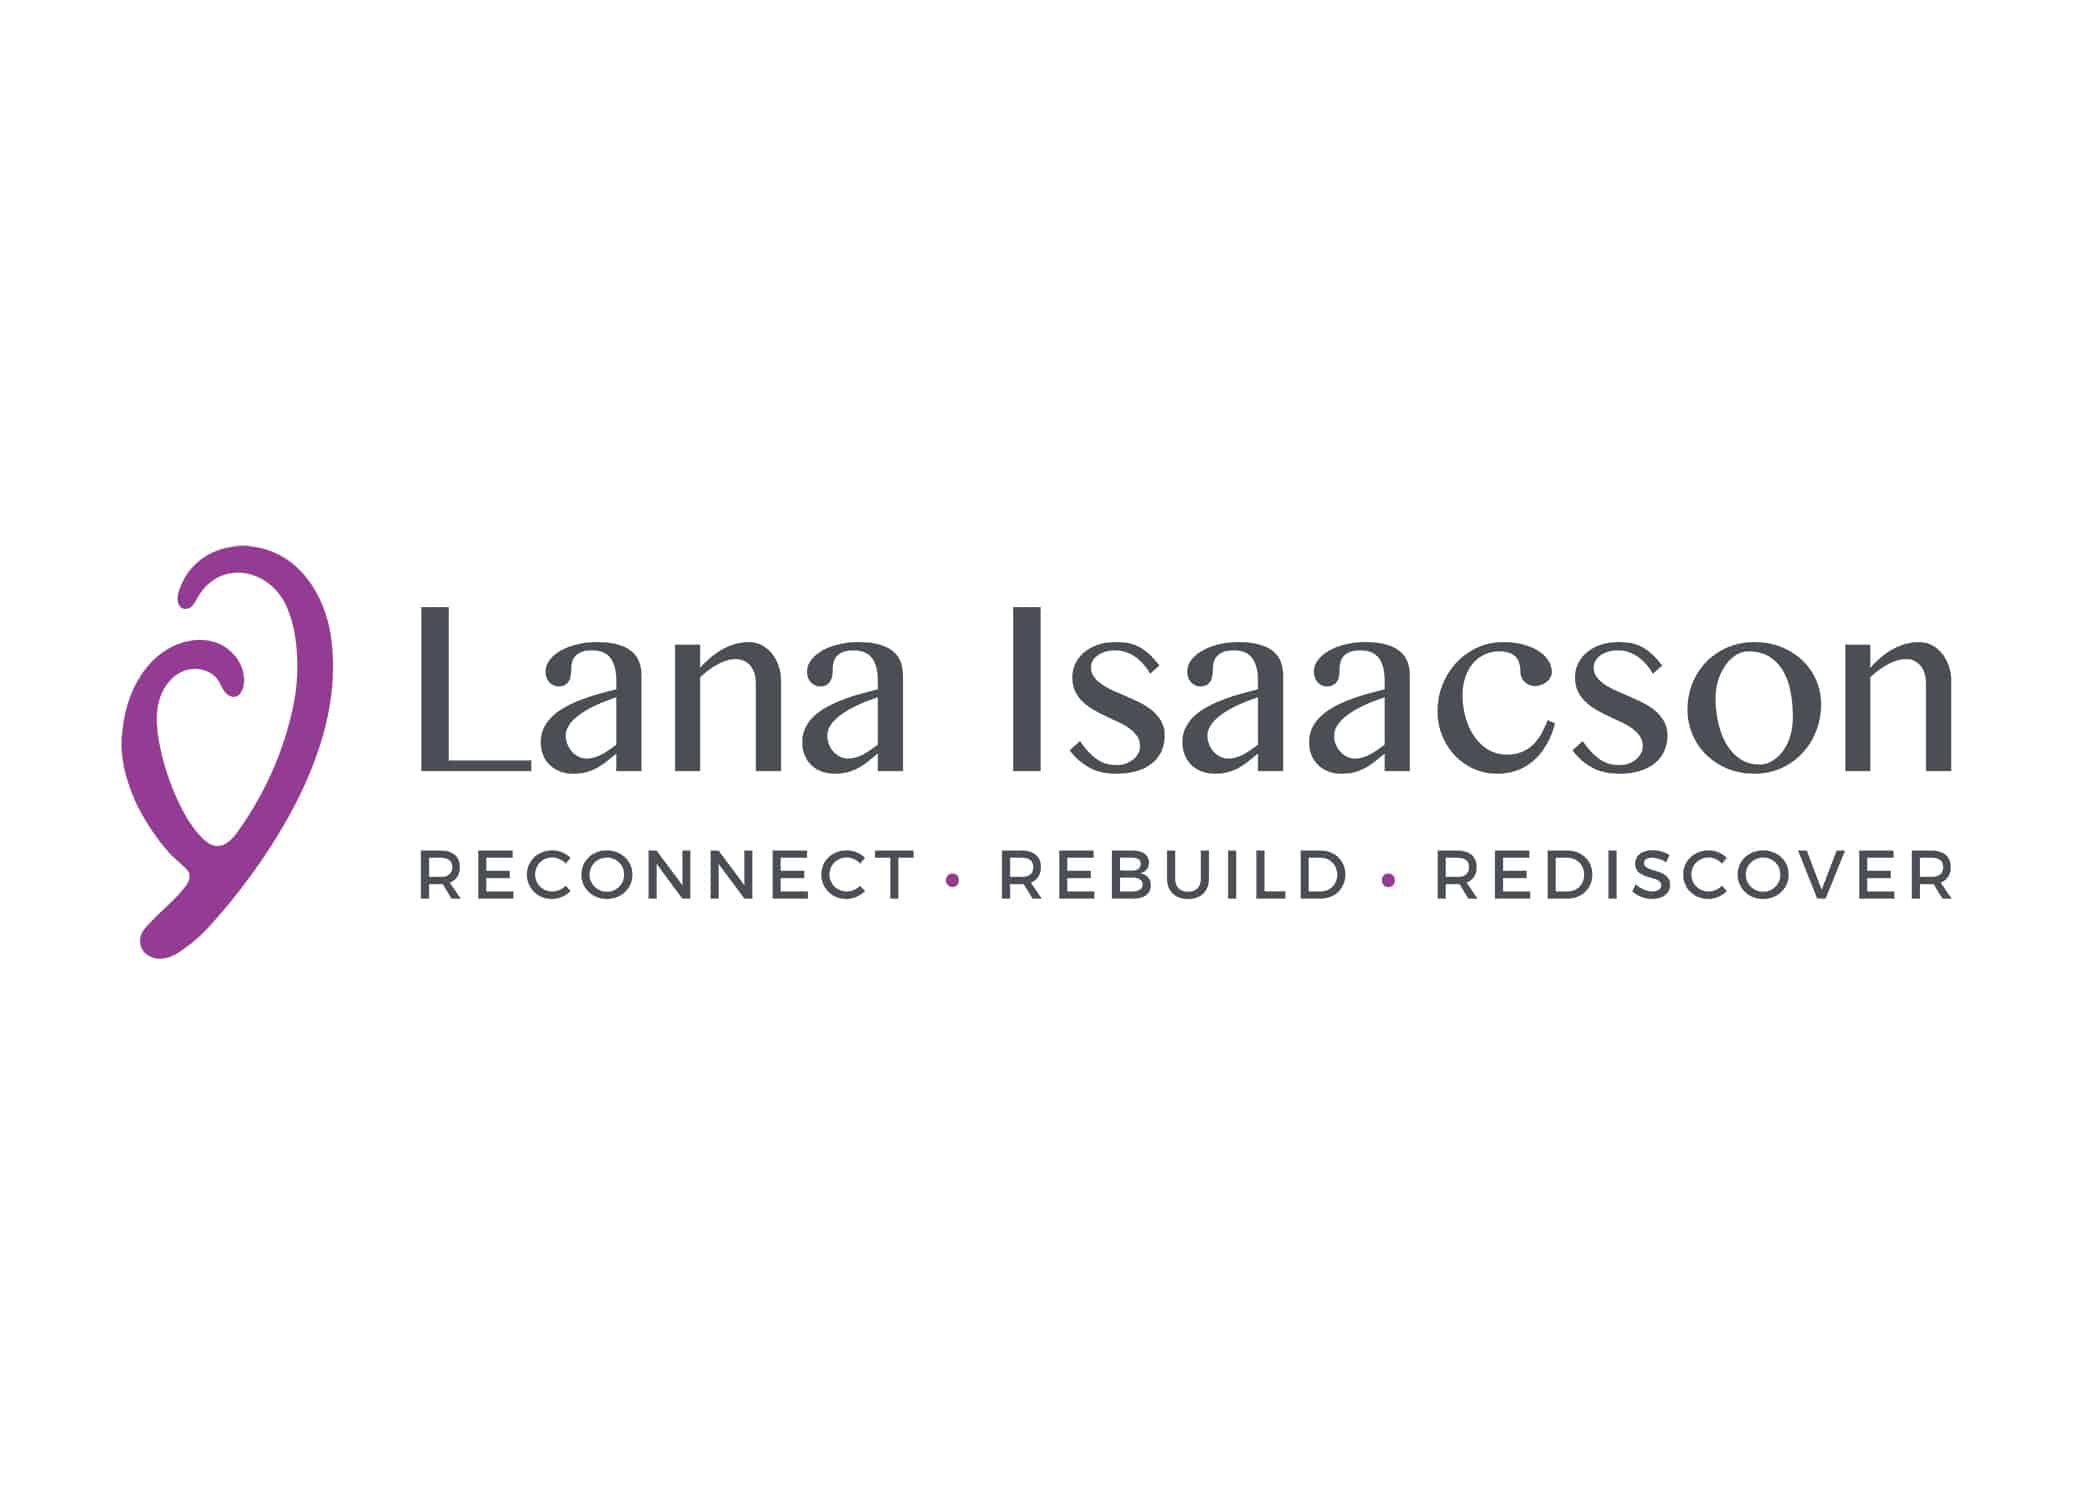 Lana Isaacson mental health logo design with abstract violet heart icon design and the tagline: Reconnect, Rebuild, Rediscover.